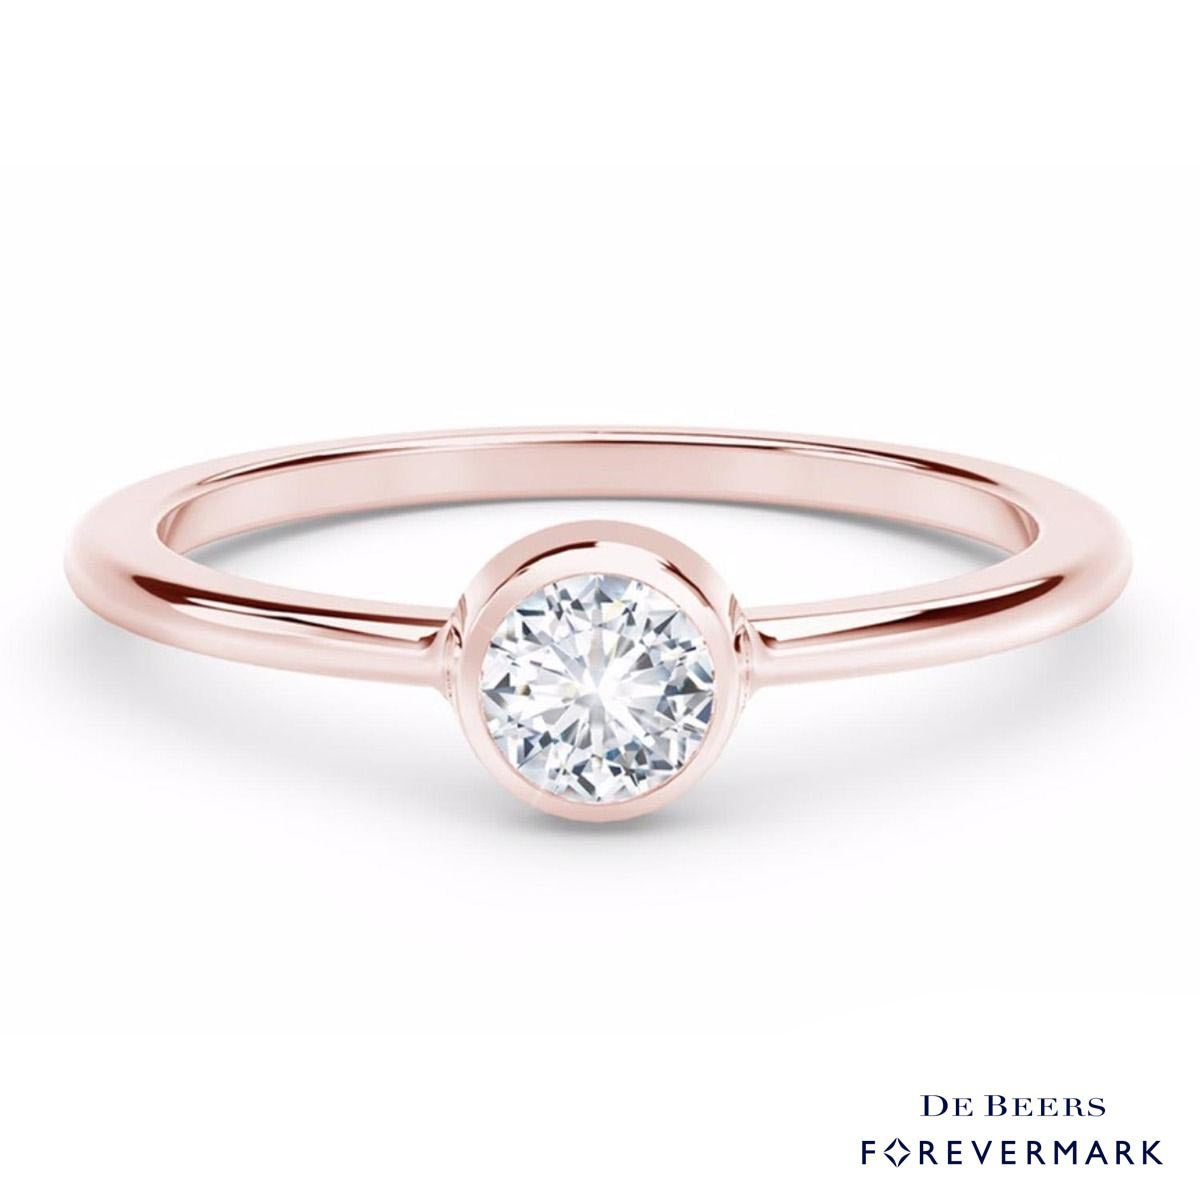 De Beers  Forevermark Tribute Collection Classic Bezel Stackable Ring in 18kt Rose Gold (1/10ct)